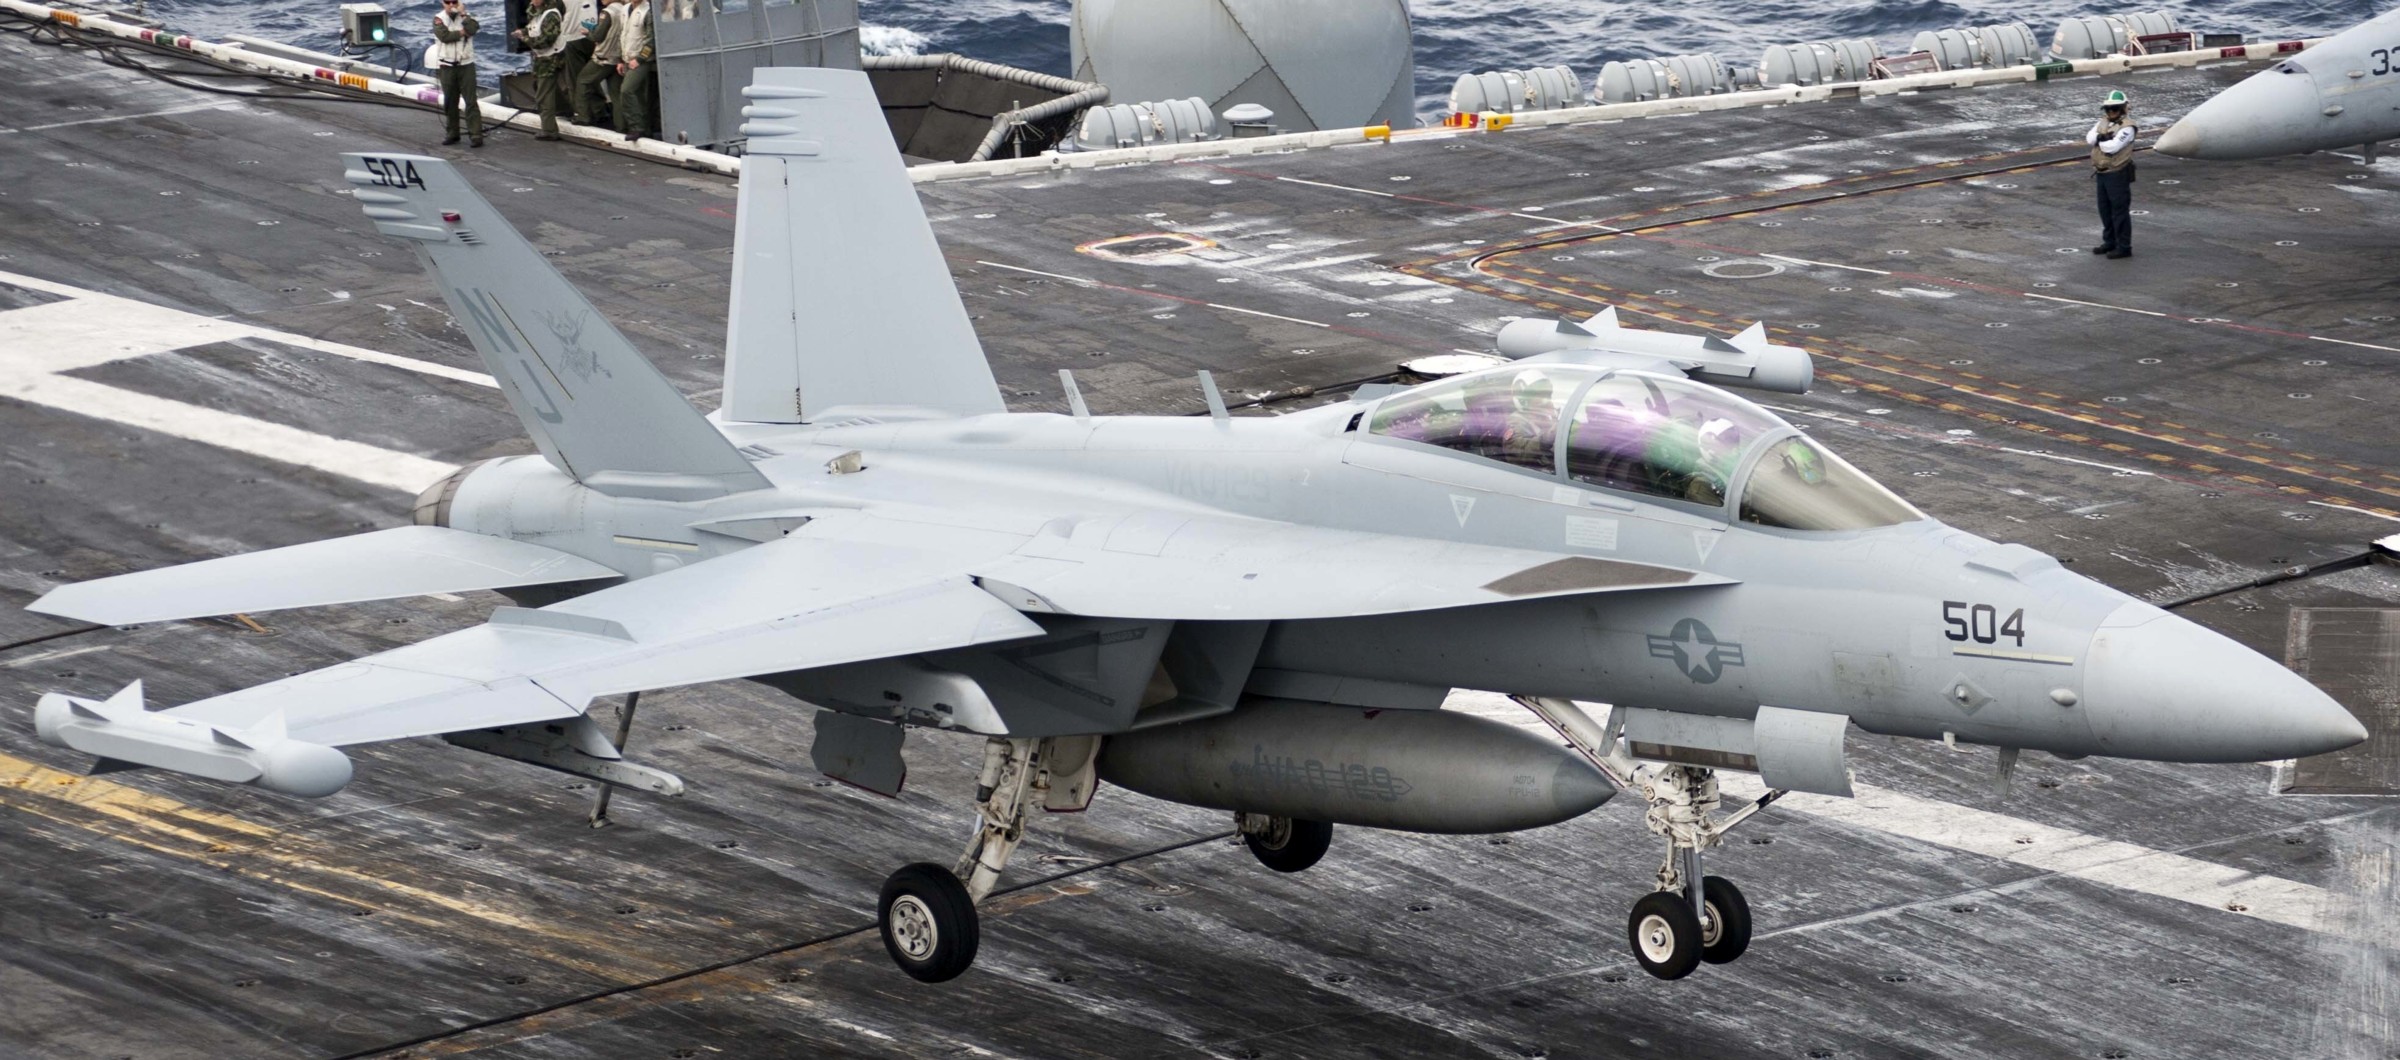 vaq-129 vikings electronic attack squadron fleet replacement frs us navy ea-18g growler 12